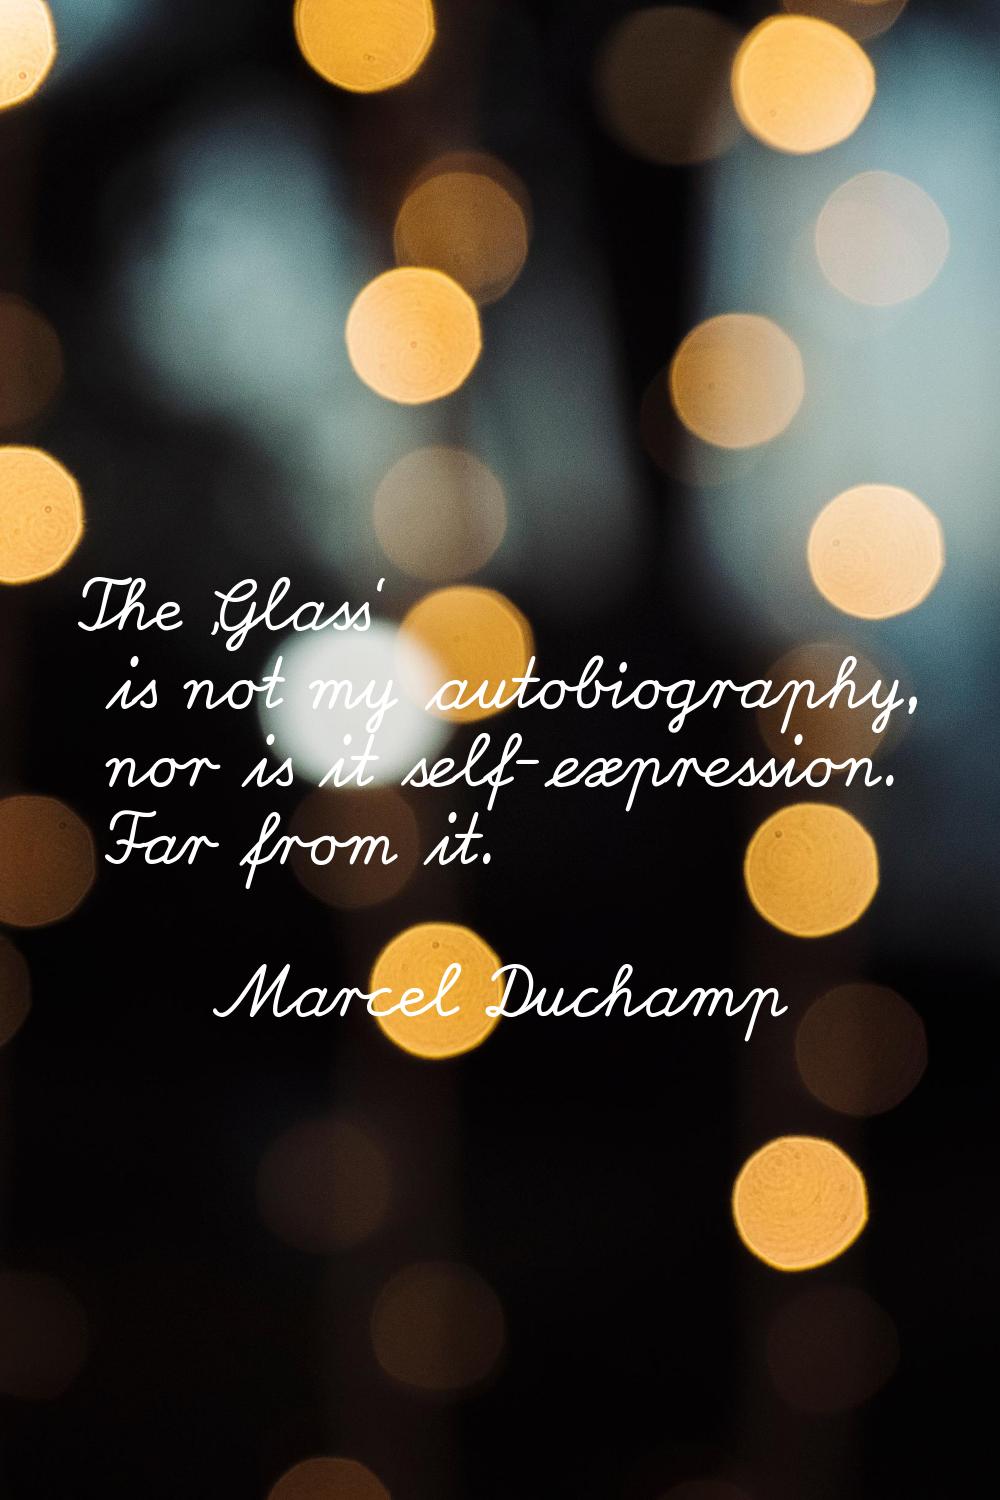 The 'Glass' is not my autobiography, nor is it self-expression. Far from it.